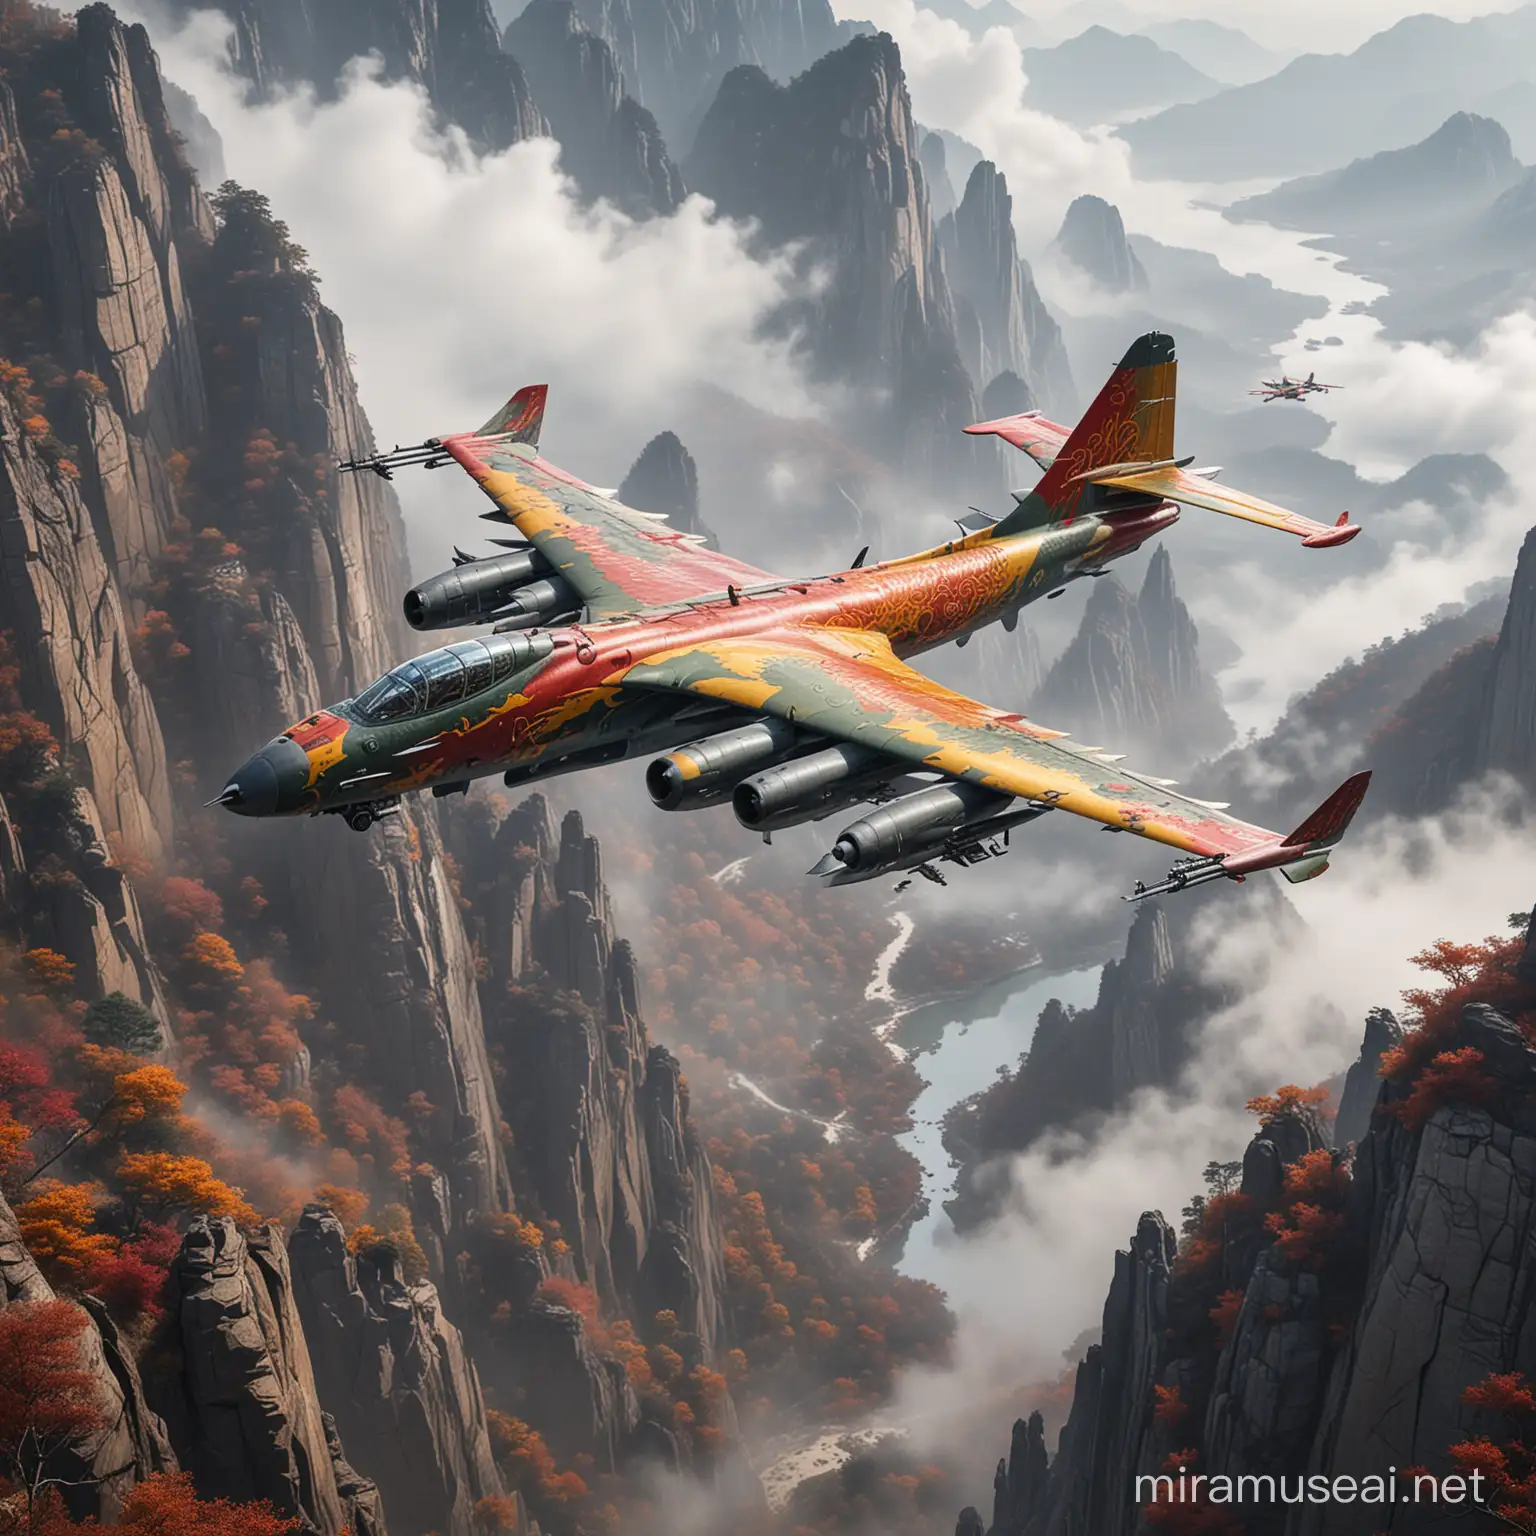 Chinese Military H6 Bomber with Traditional Dragon Painting Flying over Cliff in Autumn